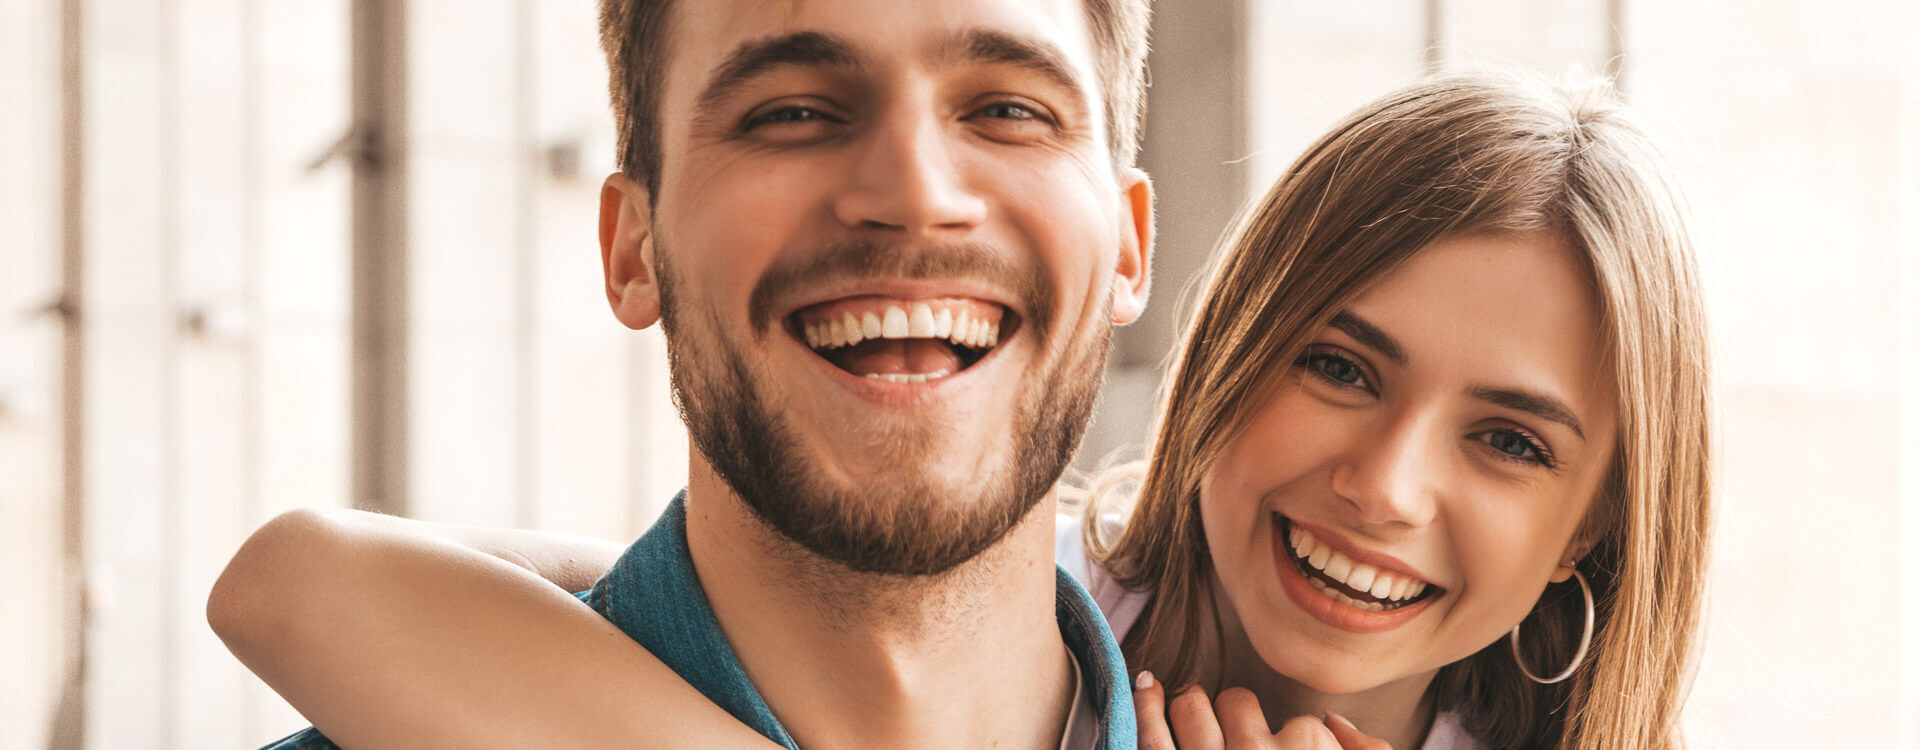 Young man and woman smiling together